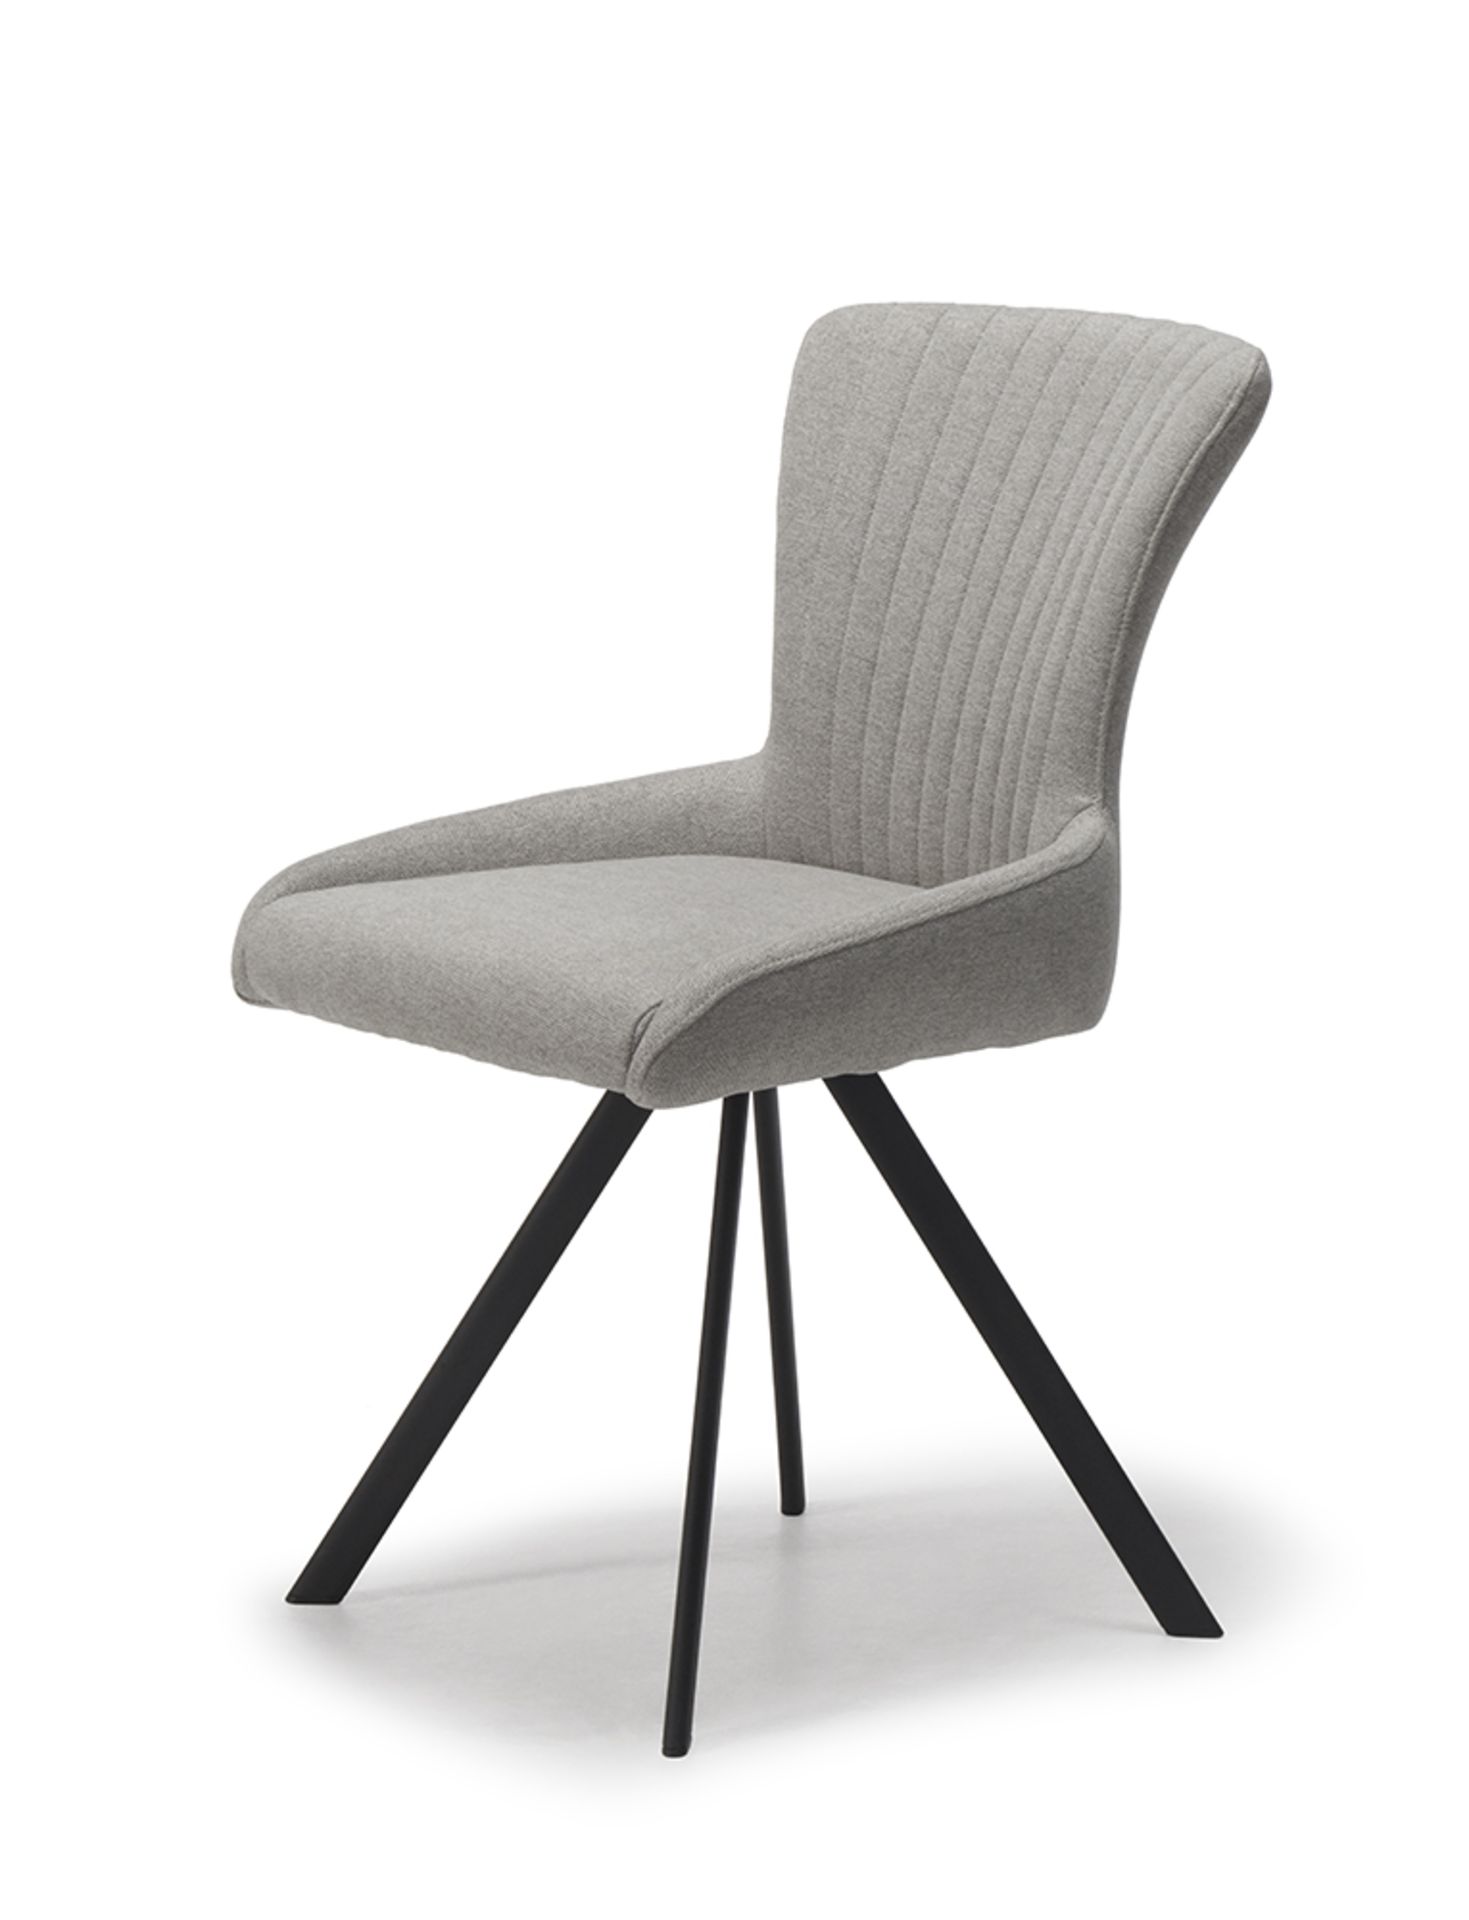 A Set of 6 x Maria Chairs by Kesterport Maria has the same self-return mechanism as many of the - Image 9 of 9